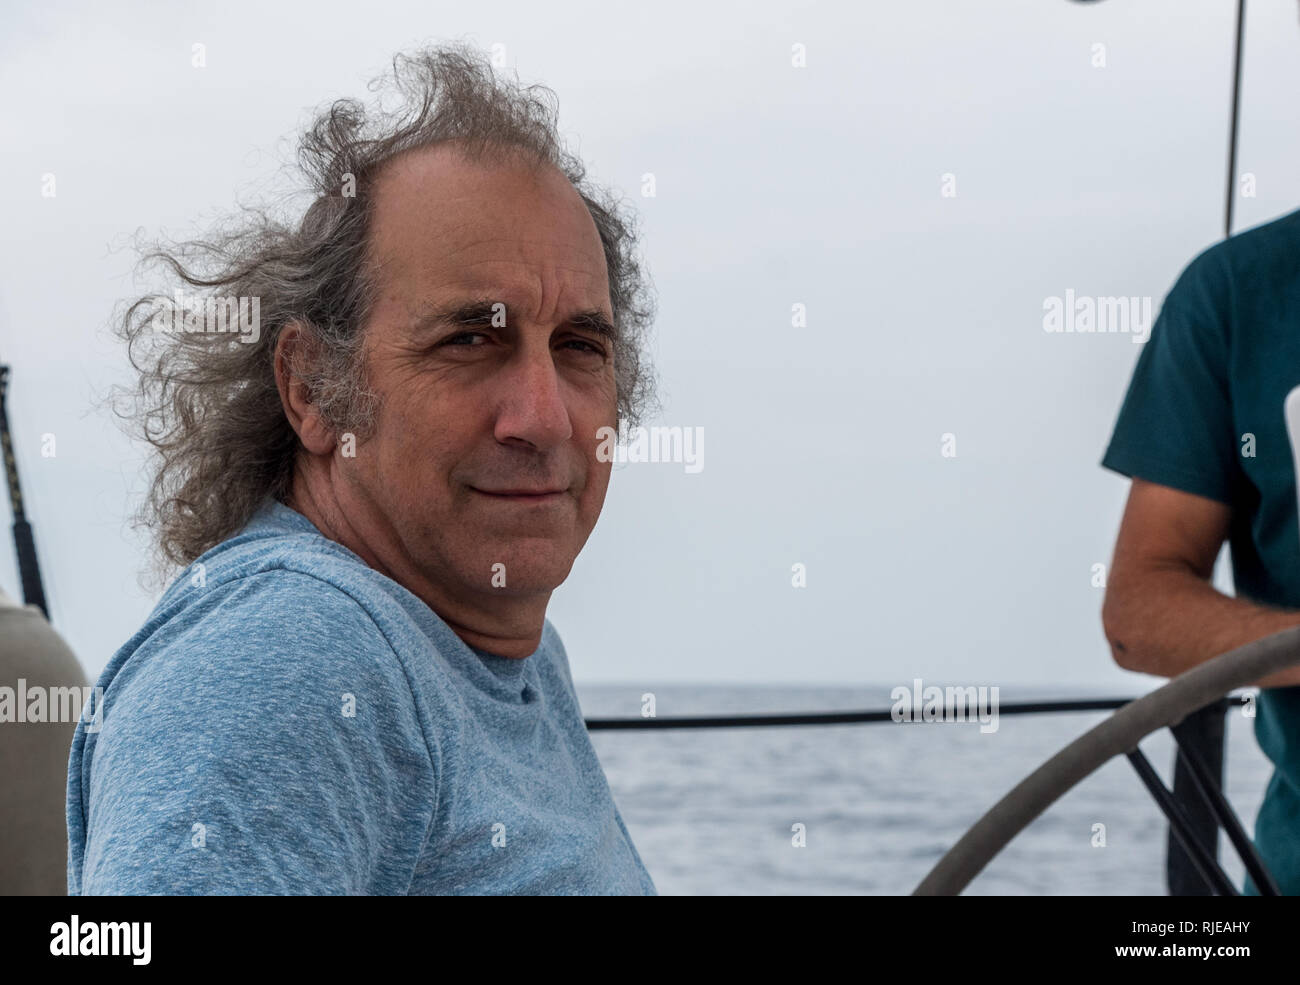 Older man sitting on a sailboat smiling off the coast of Lesvos Stock Photo